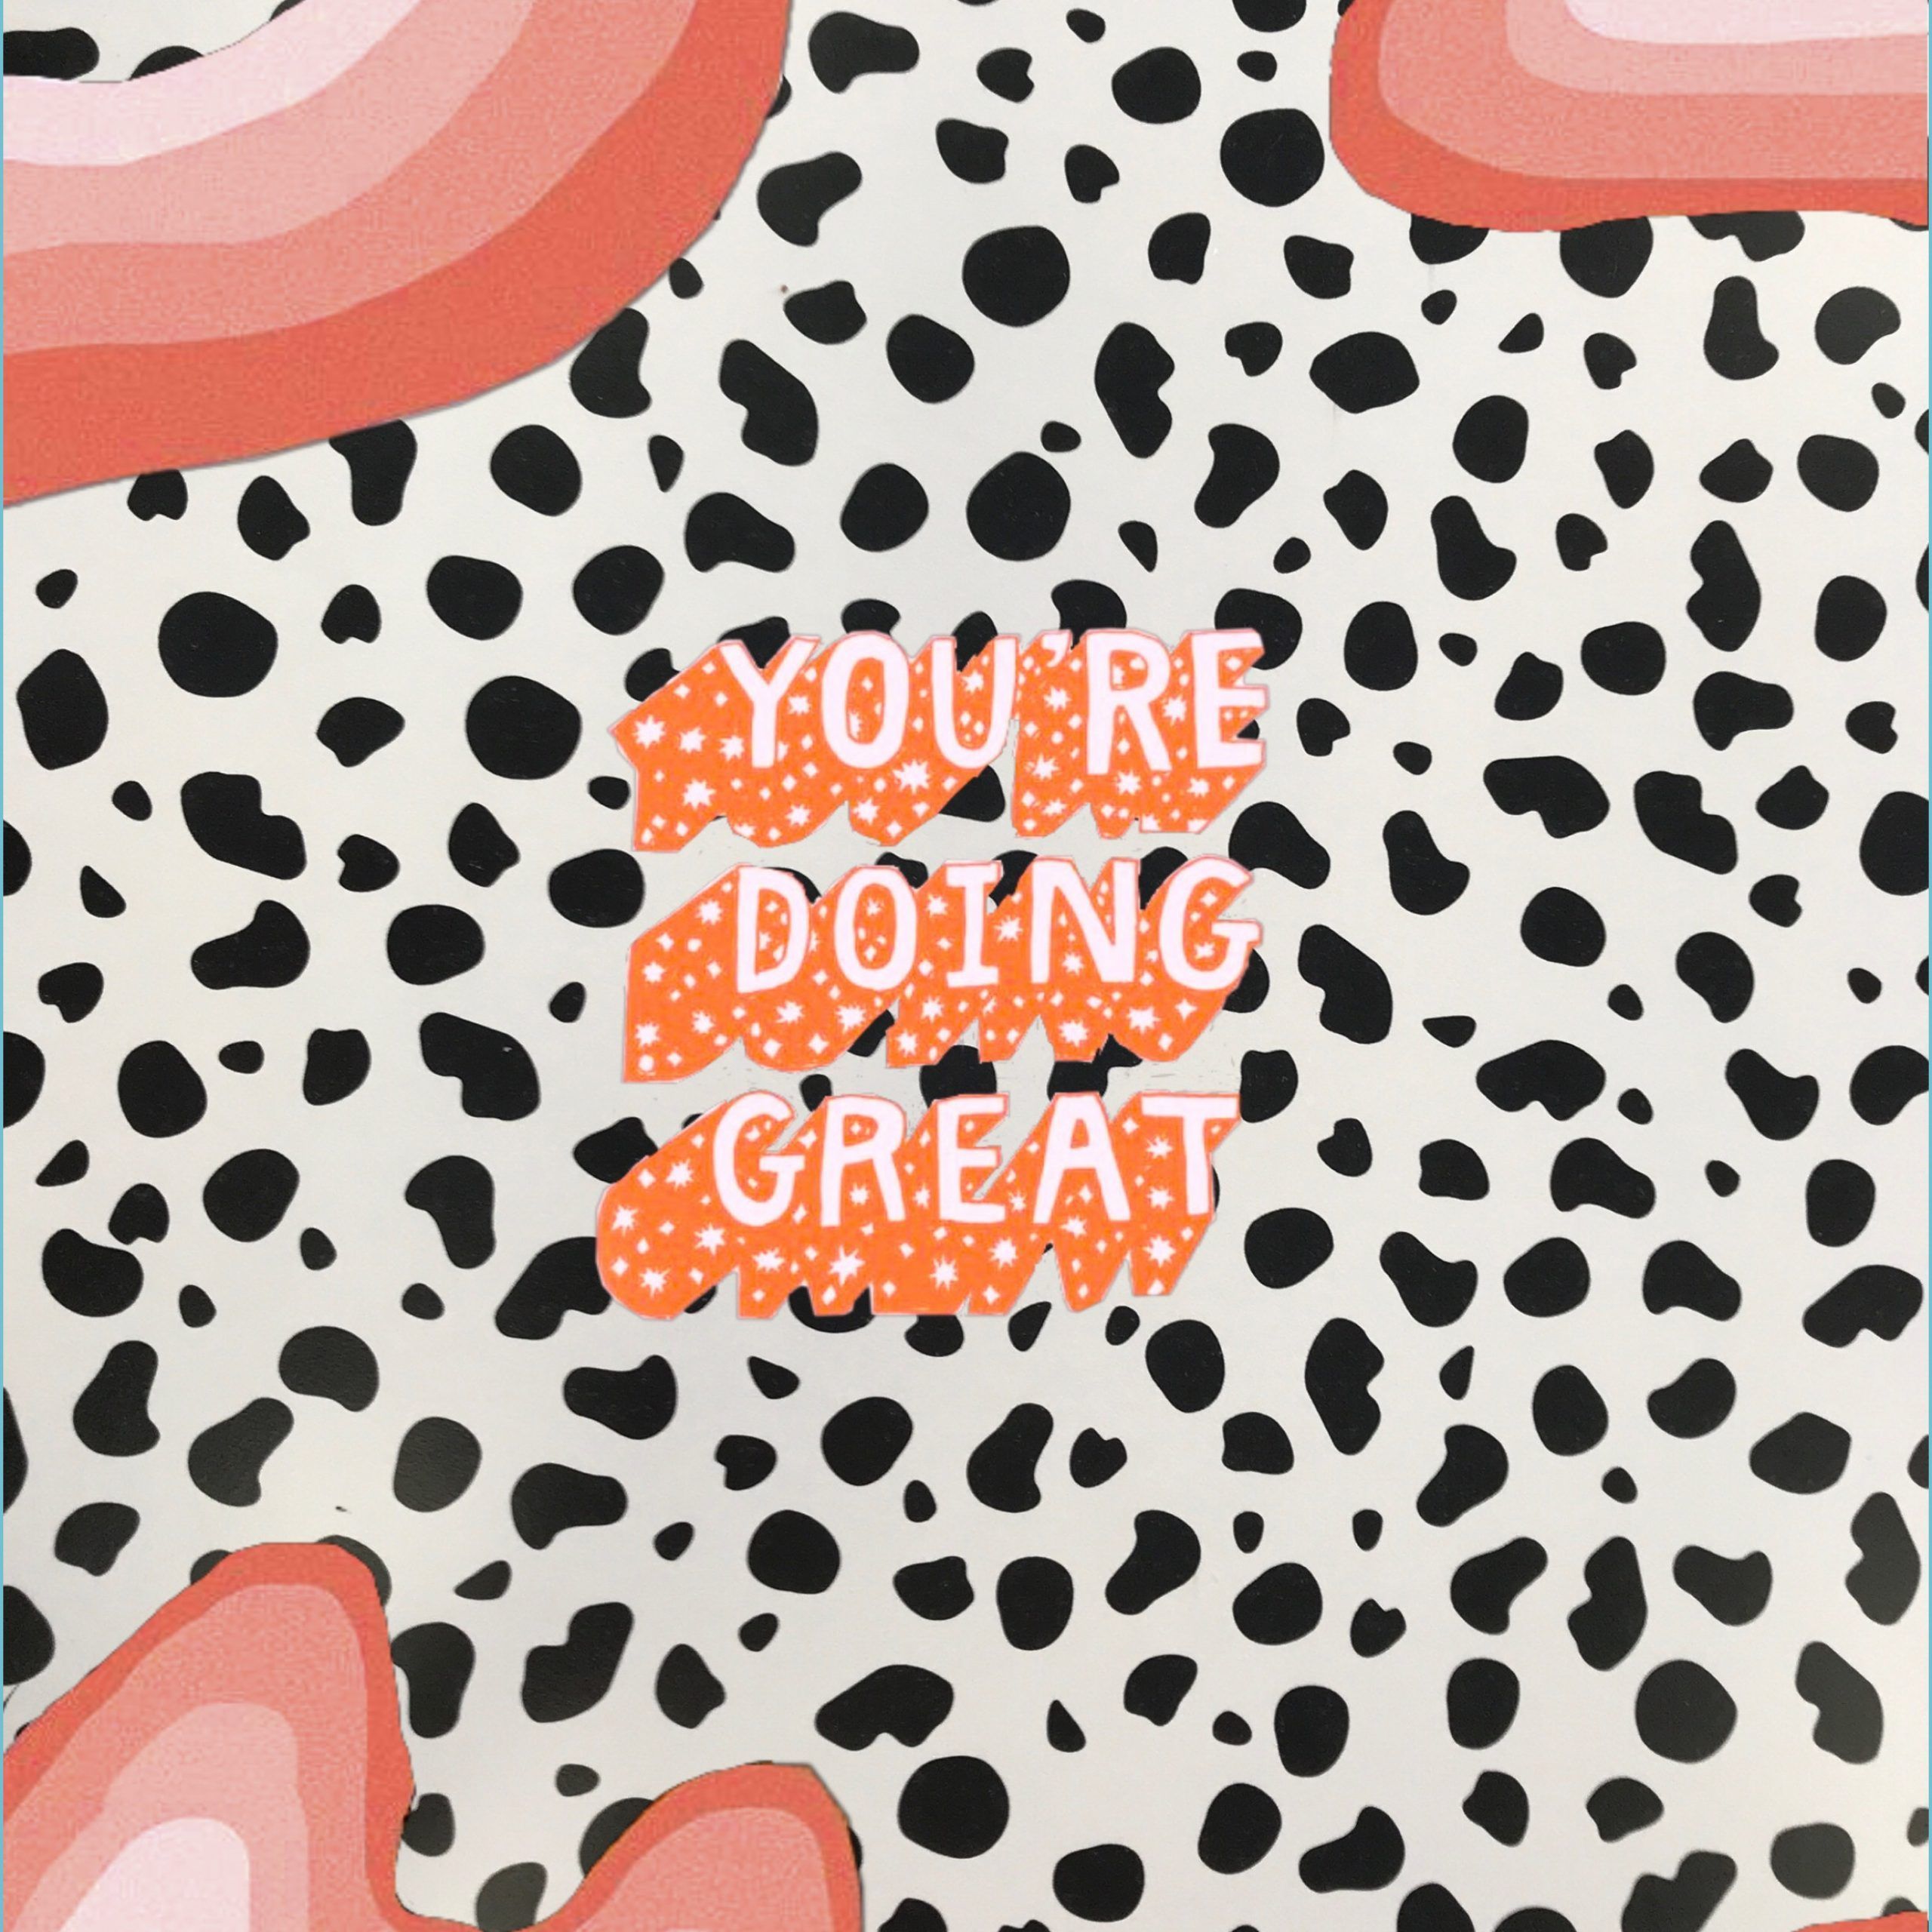 An image with a cow print background and the text 'You're doing great' in orange and white. The image also has pink and orange clouds on the corners. - VSCO